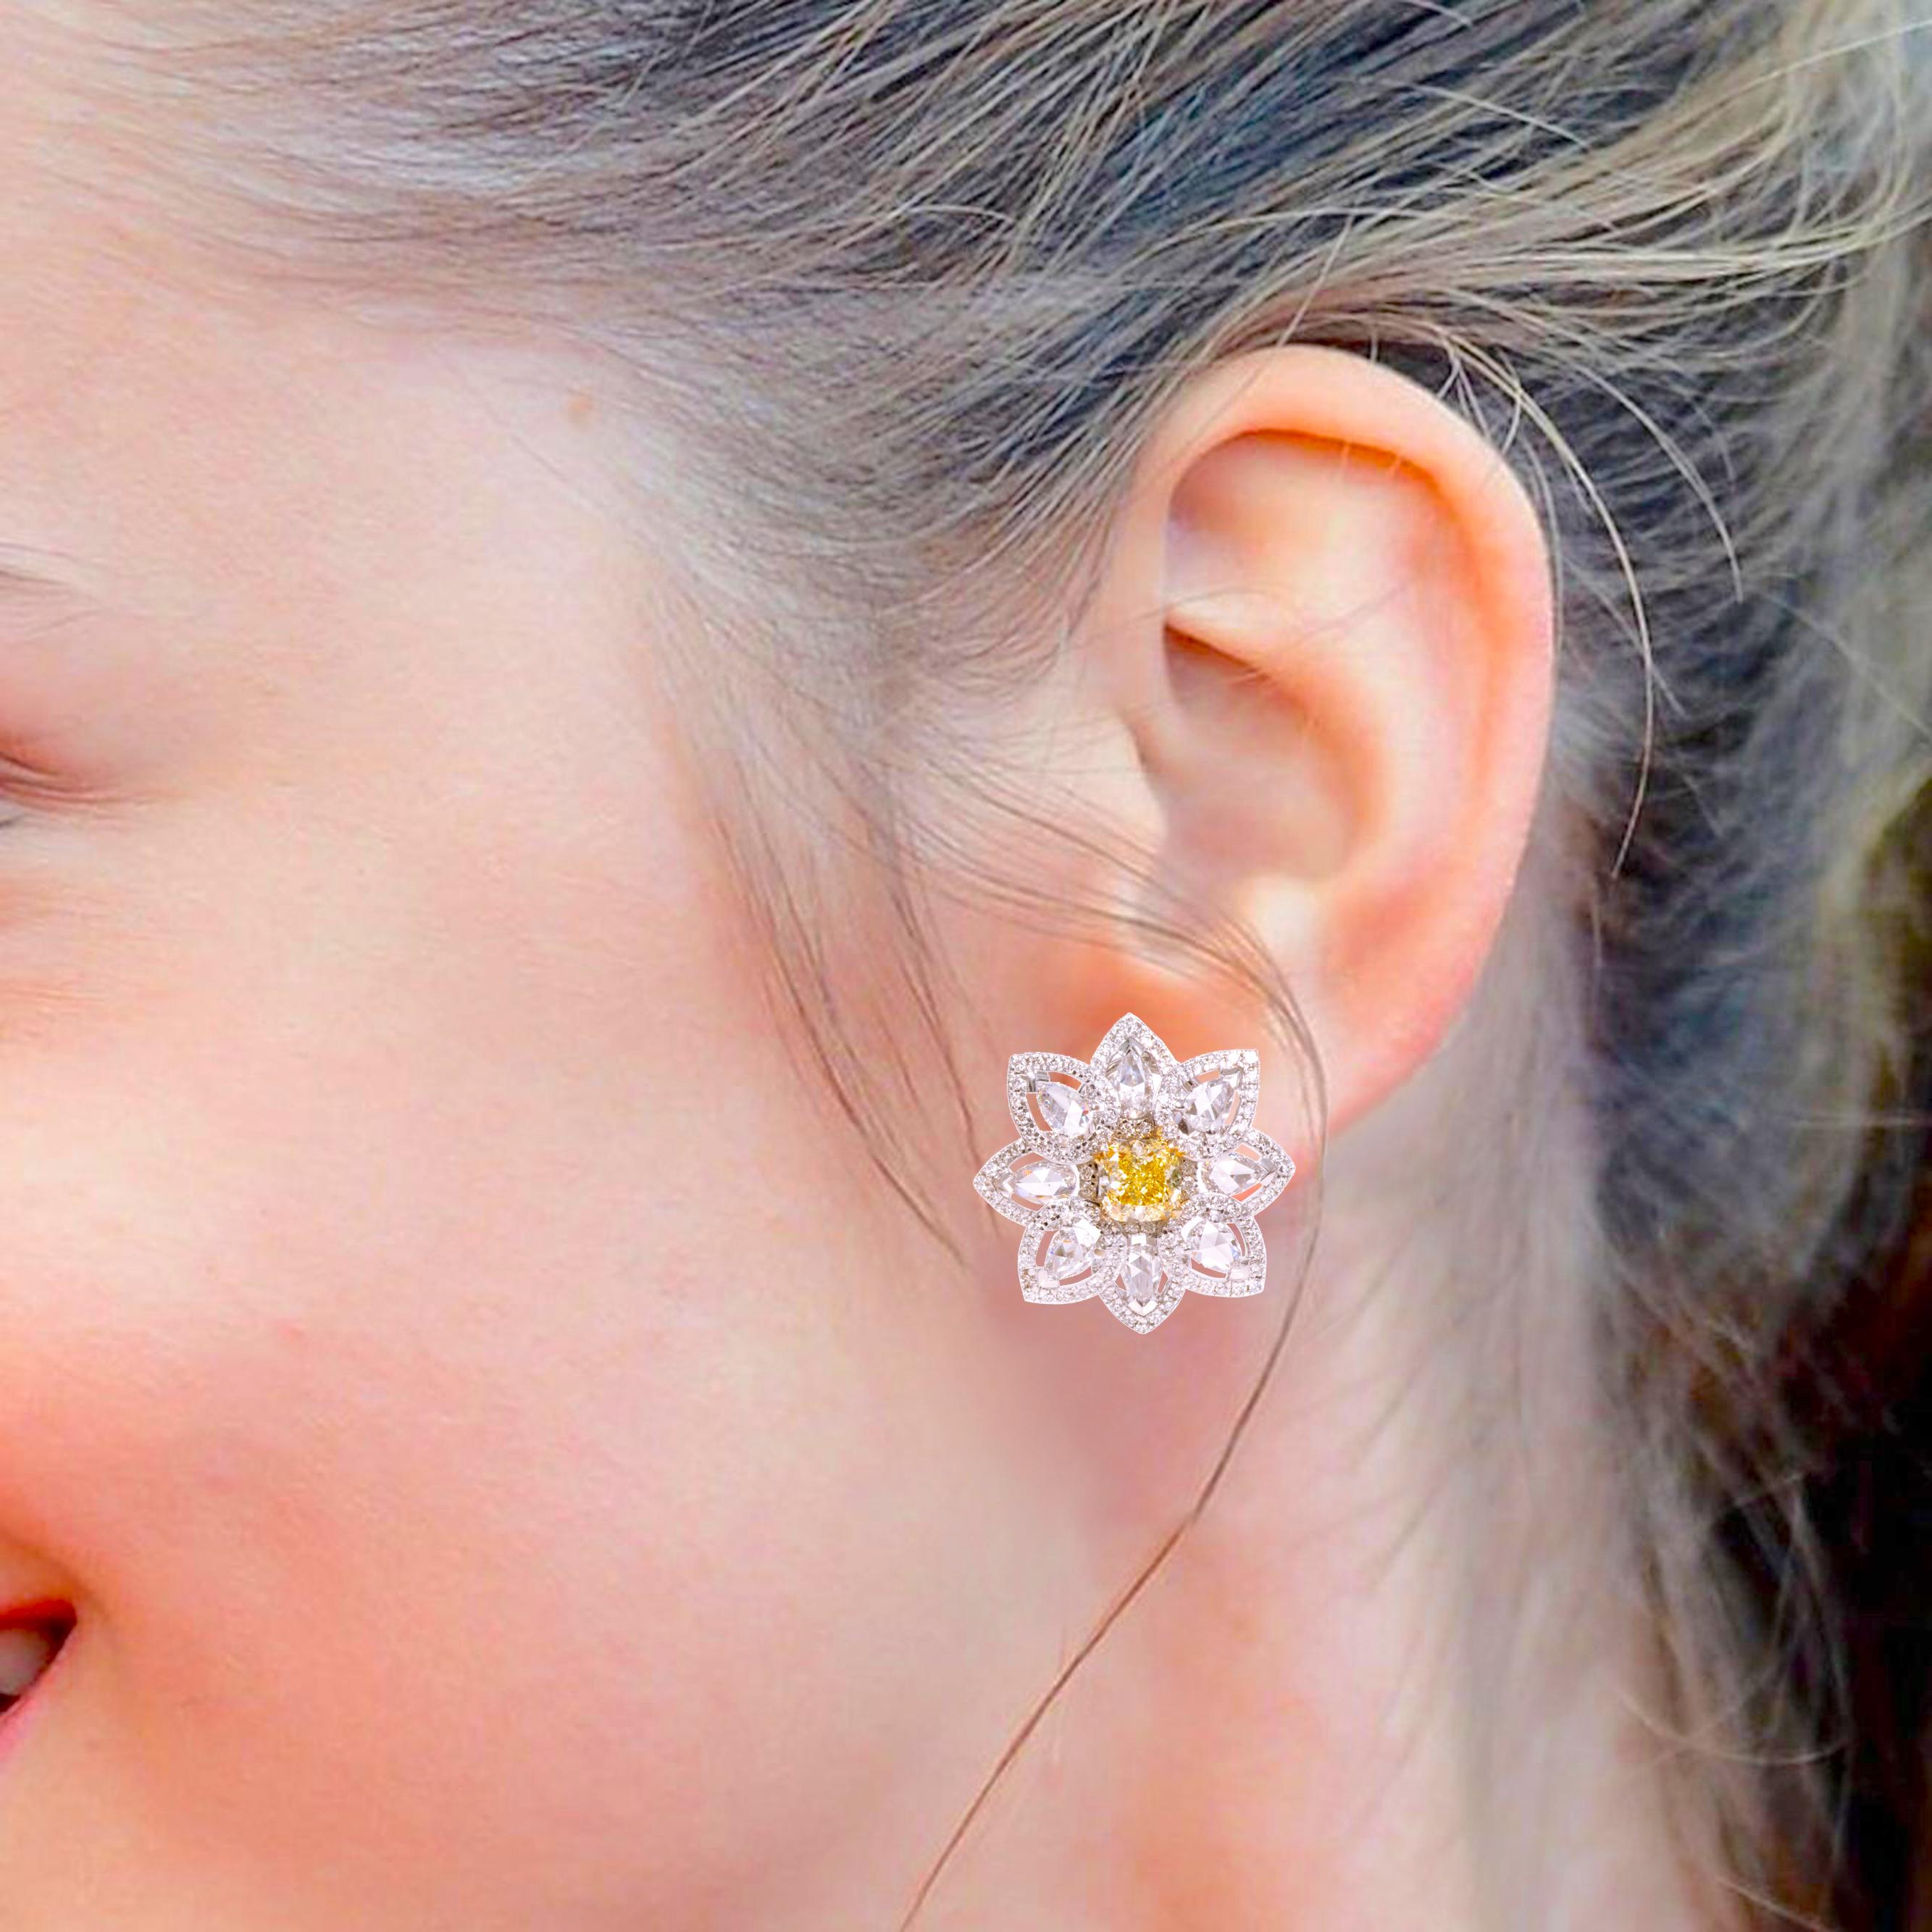 18 Karat Gold 3.36 Carat Yellow and White Diamond Modulation Stud Earrings

Flowers are meant to fill our live with freshness and beauty. They symbolize love and to cherish that with showers of love we bring to you a craft of finesse that brings out